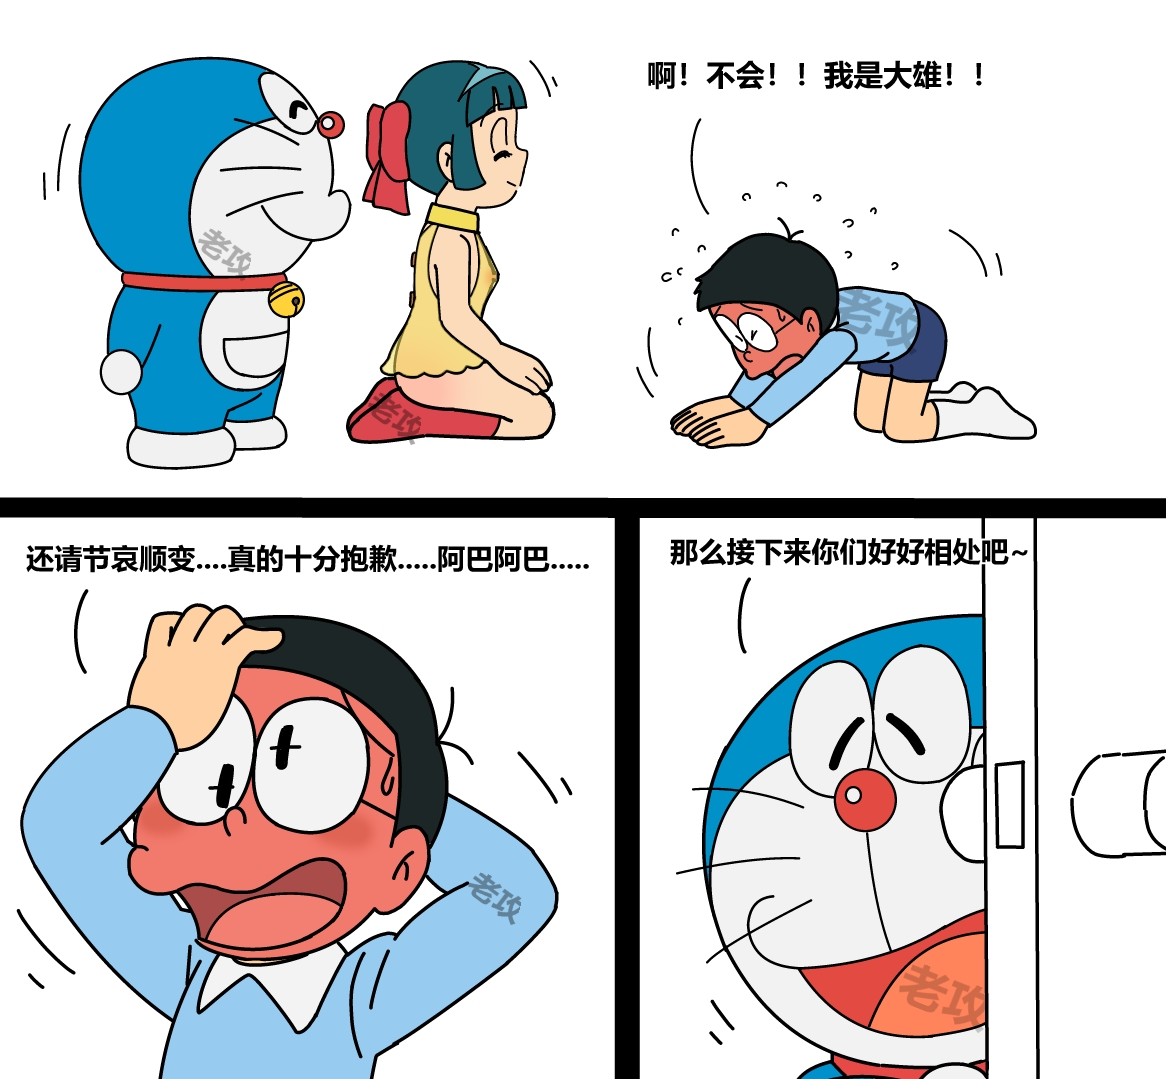 [Lao Gong] I Love Robot Girls (Part 1) (Doraemon) [Chinese] - Page 7